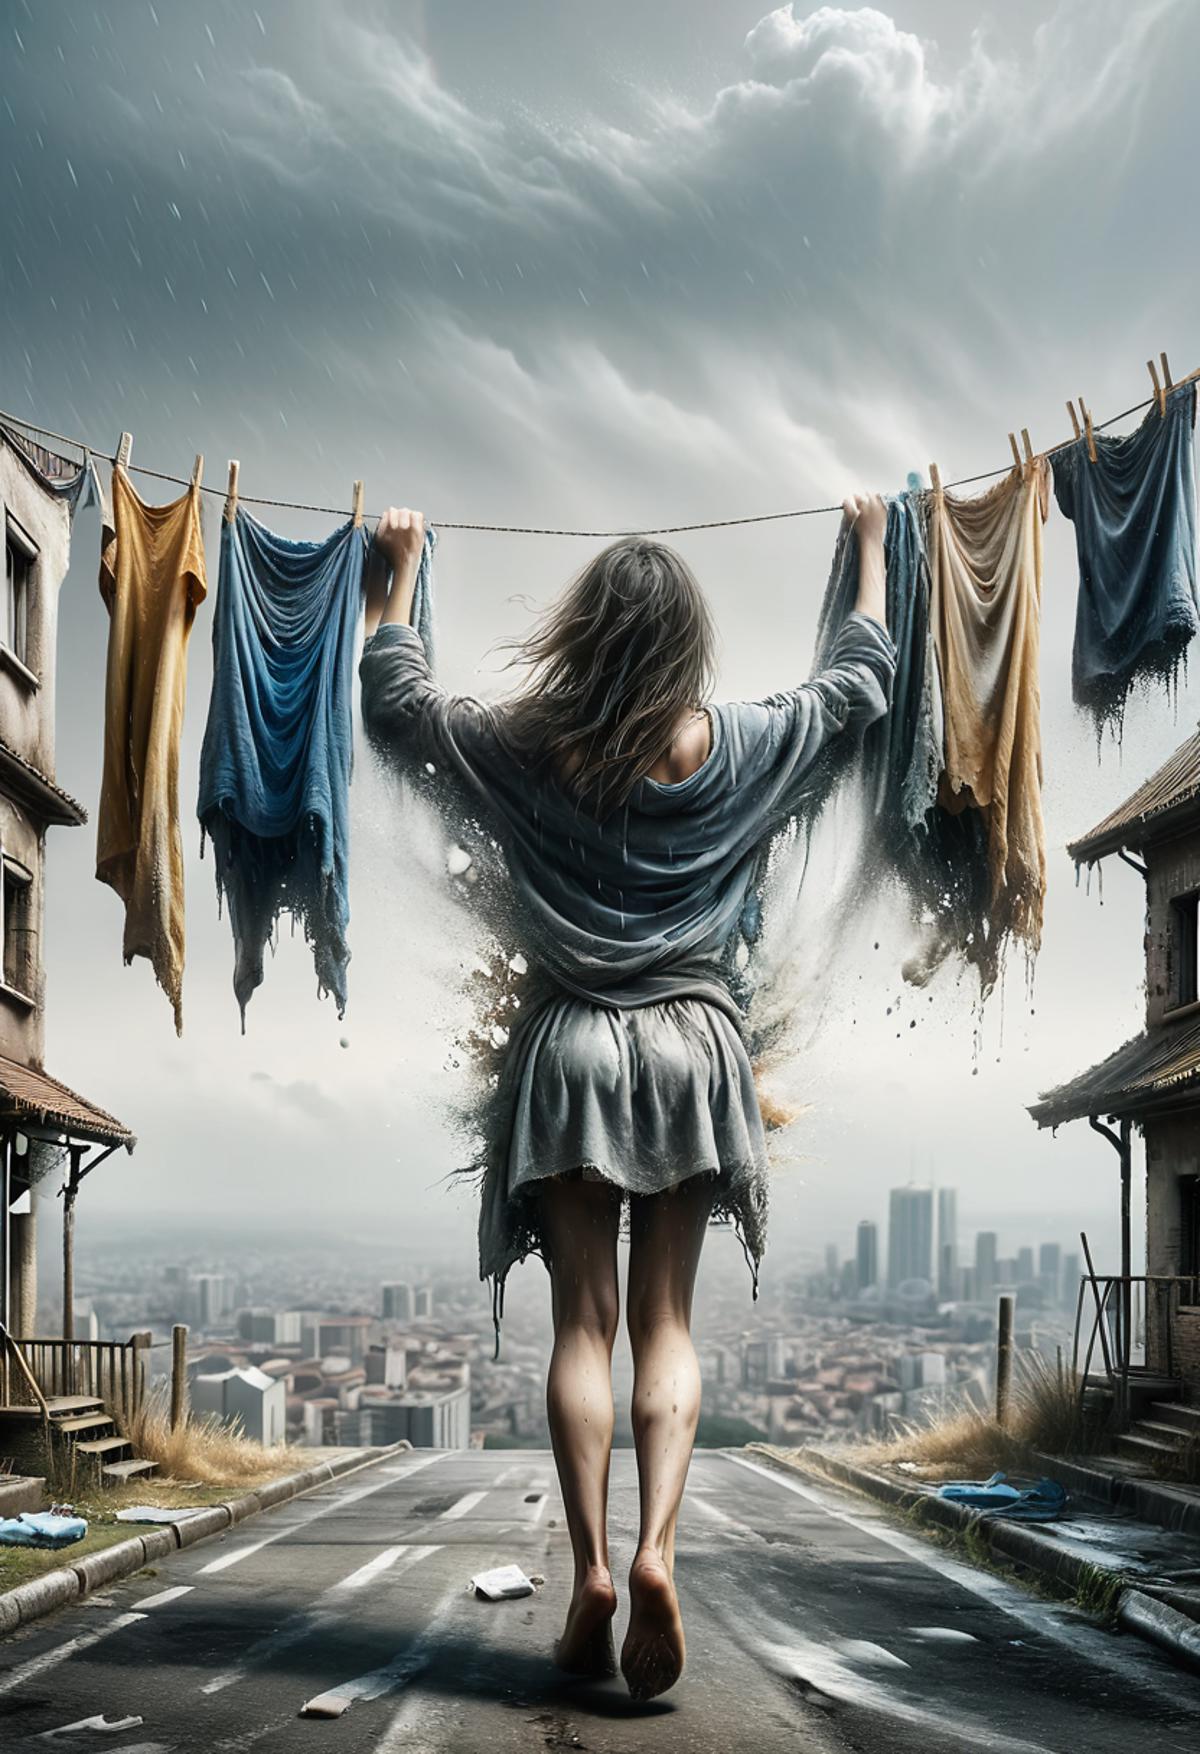 A woman standing on a rooftop holding clothes hanging from a rope.